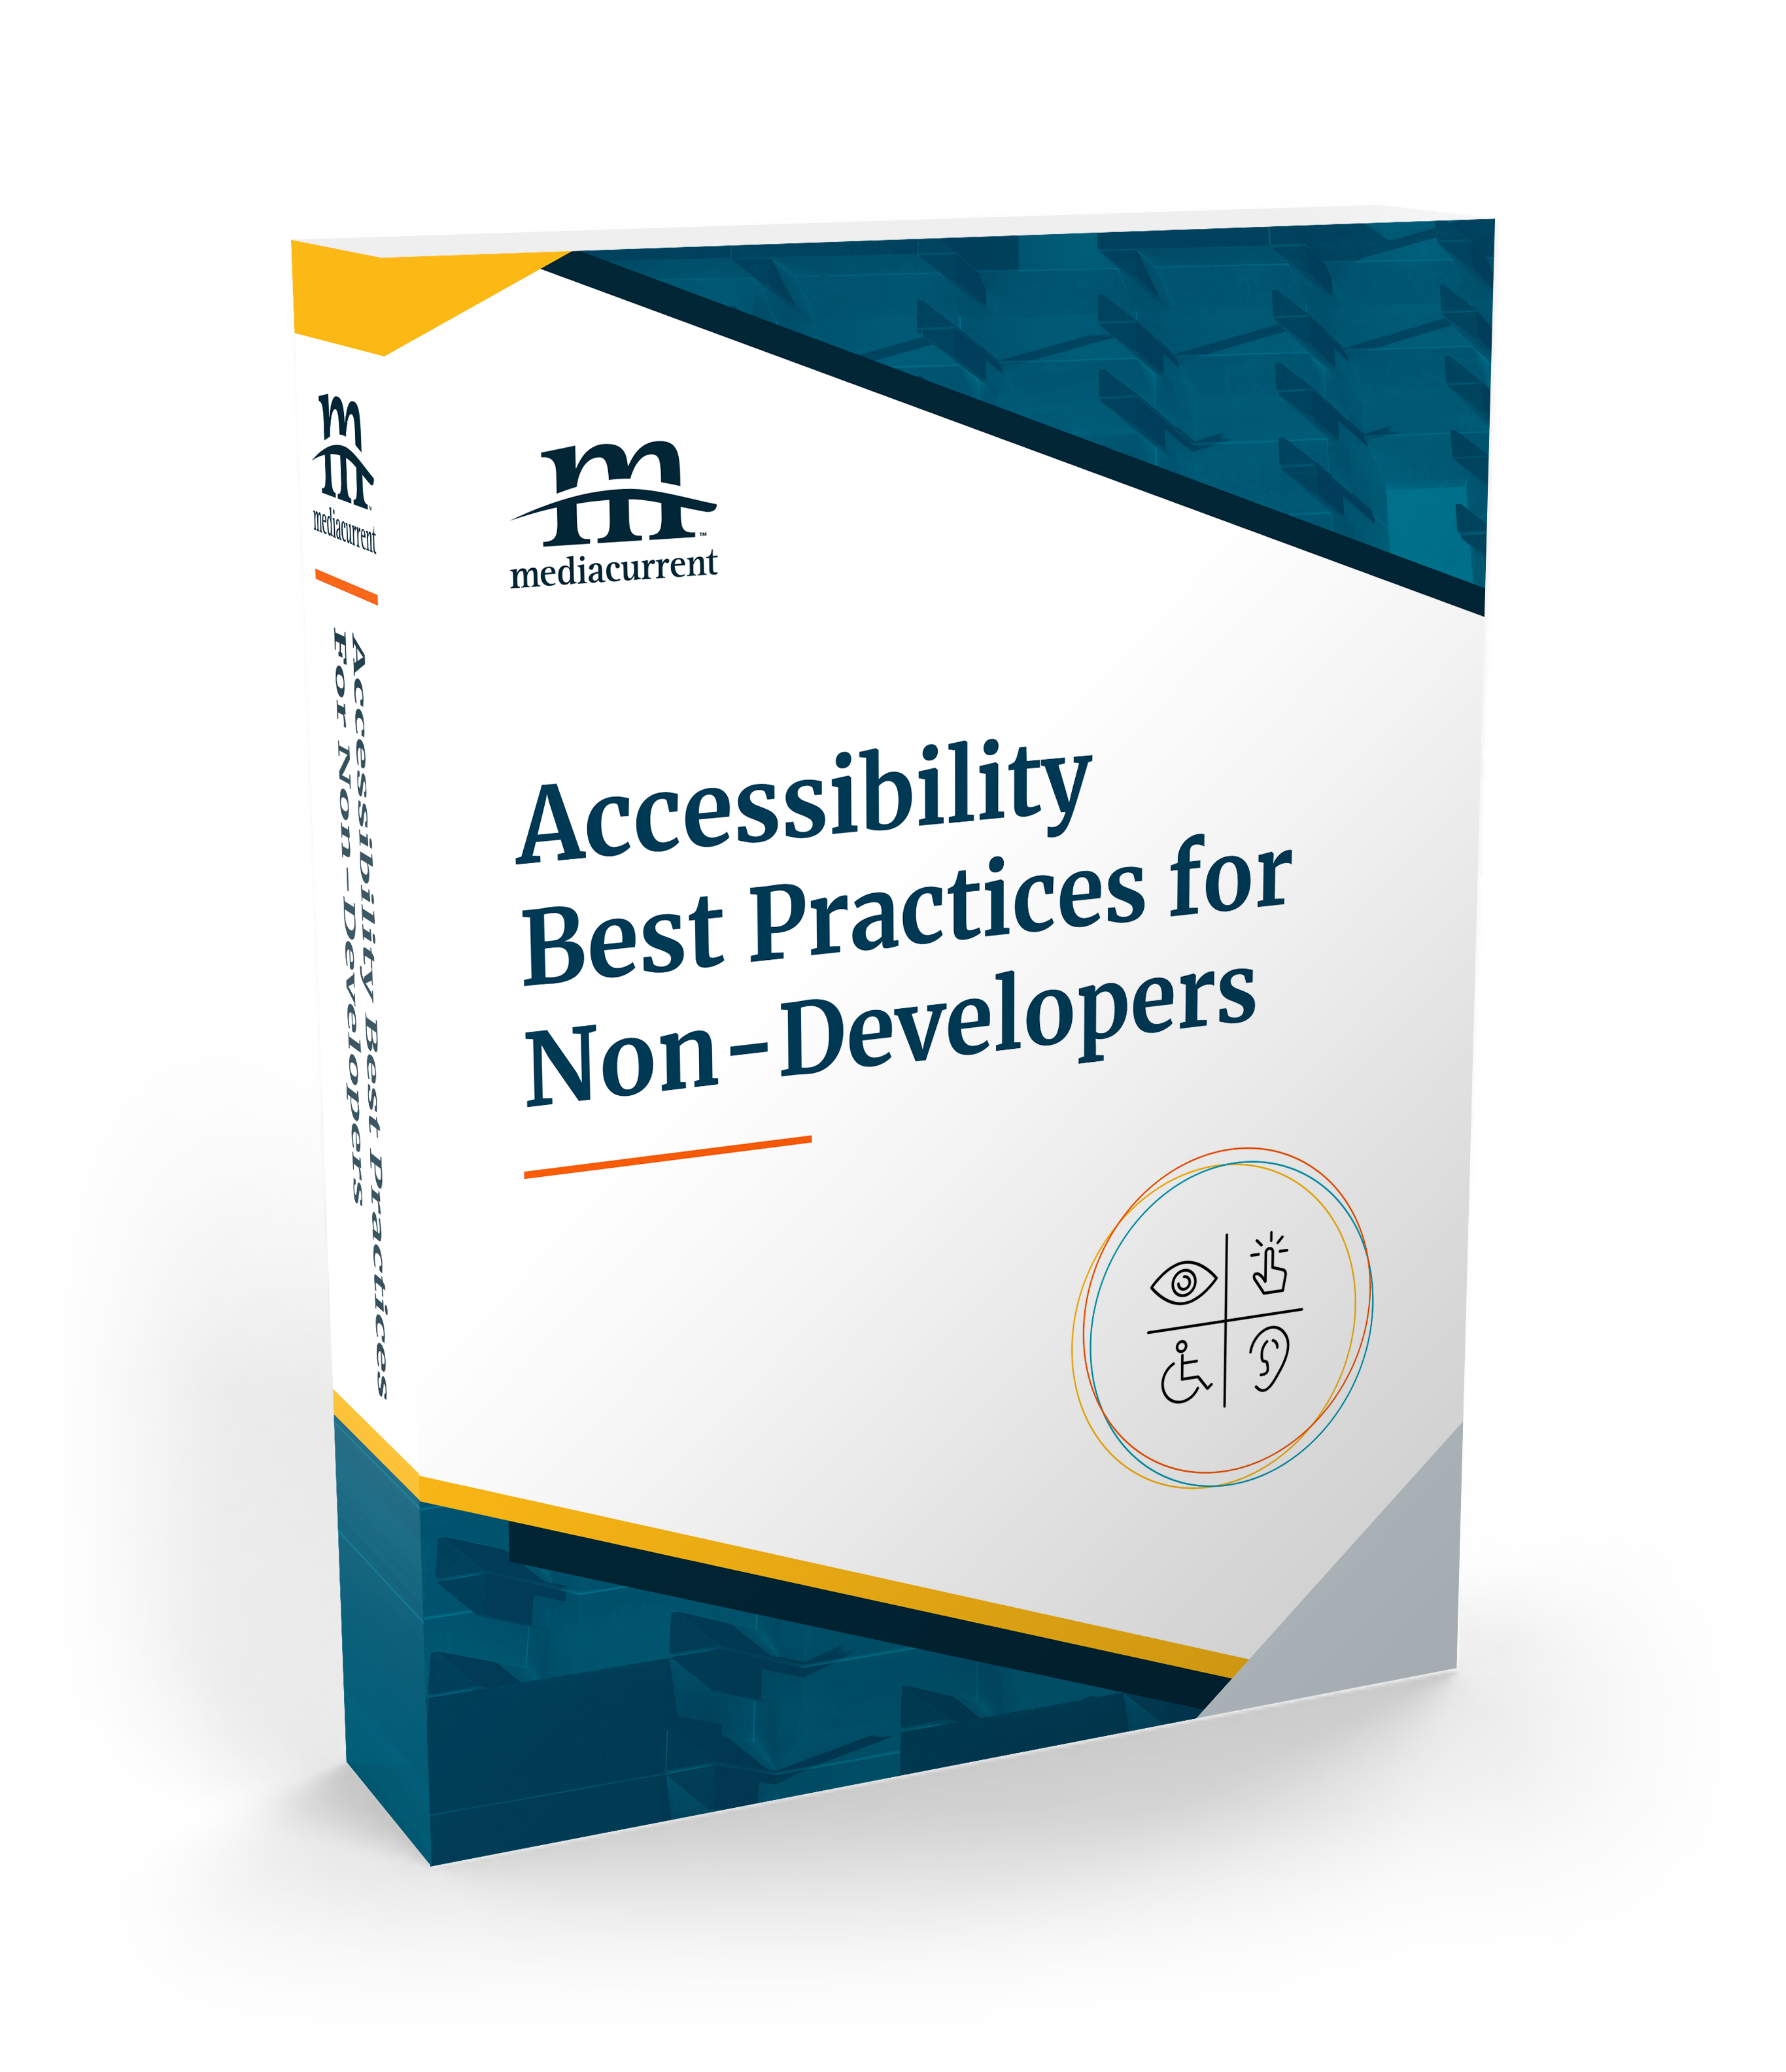 accessibility best practices for non-developers ebook cover 